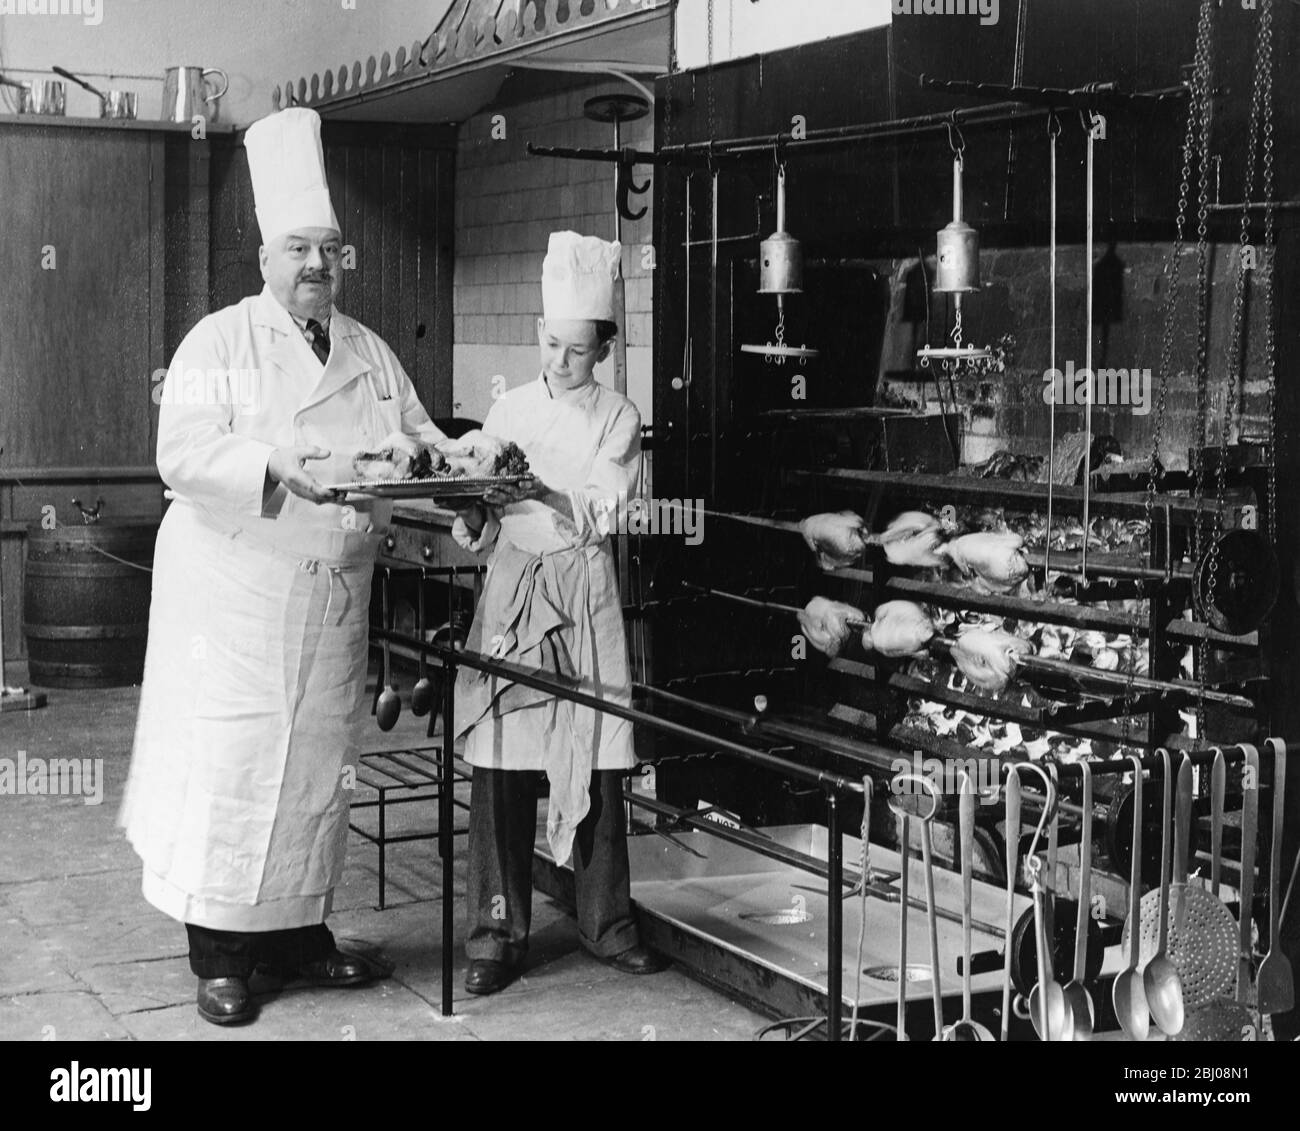 A.H. Cadier, senior chef at the Brighton Pavilion is handed fake chickens by junior chef Lloyd Payne to demonstrate the operation of the huge open fireplaces of 1825 in the kitchens at the Royal Pavilion. Brighton, Sussex, England - 16 July 1951 - Stock Photo